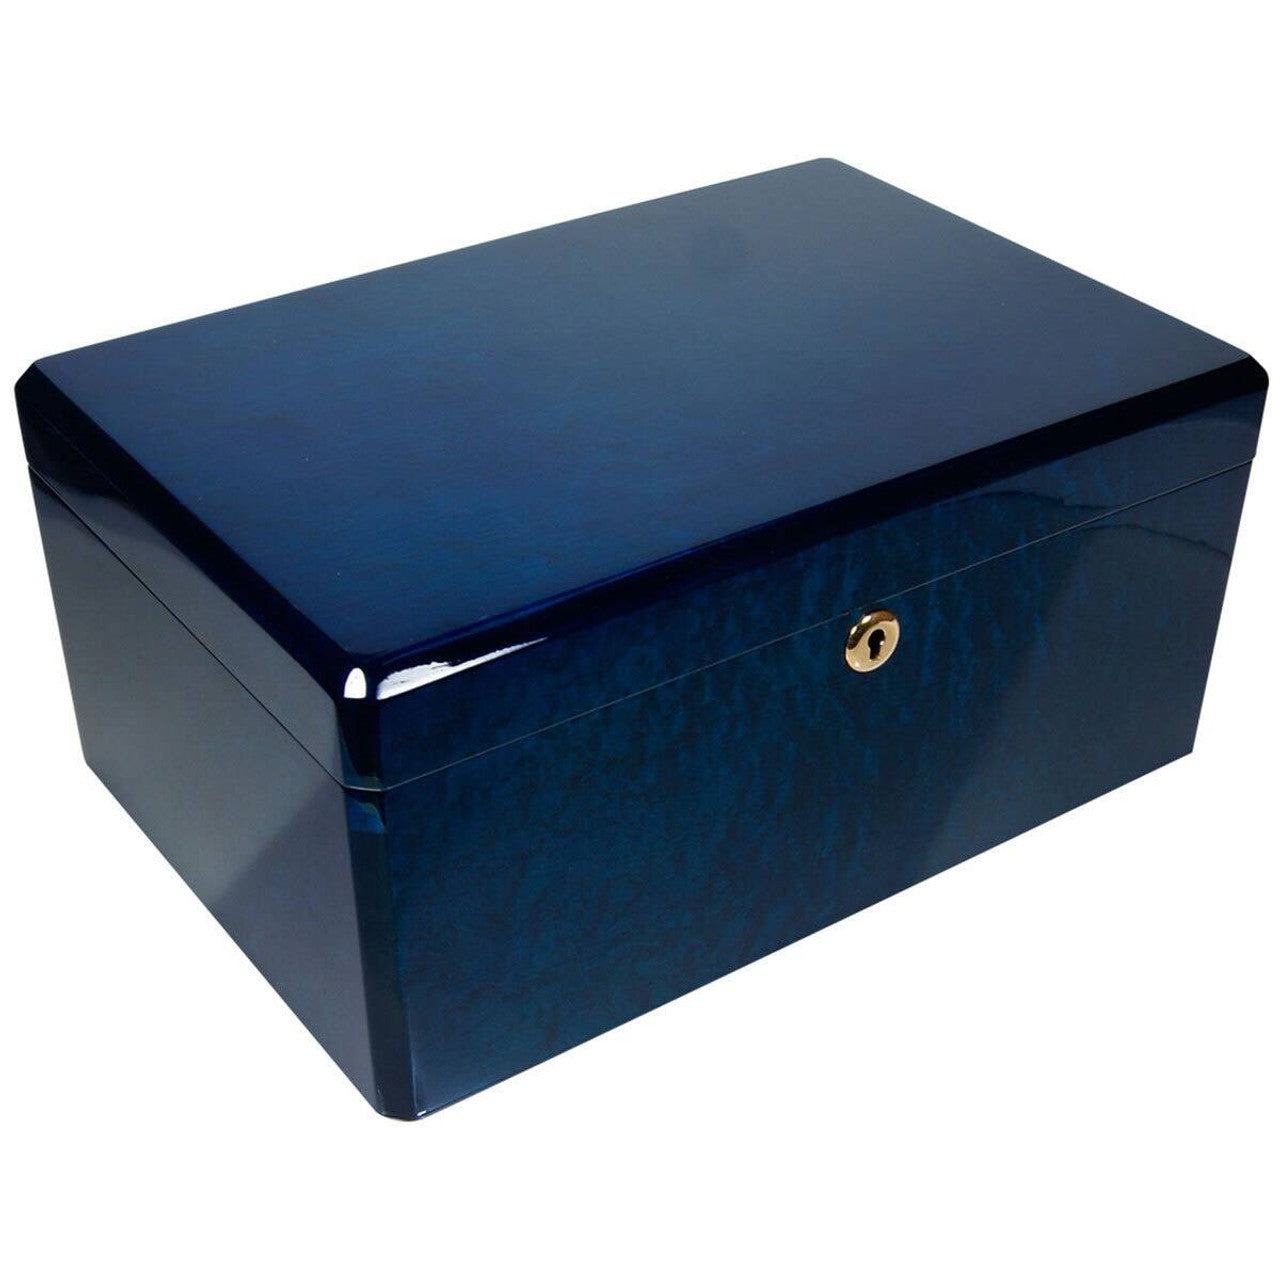 Cuban Crafters Colores Azul / Verde Humidor for 100 Cigars